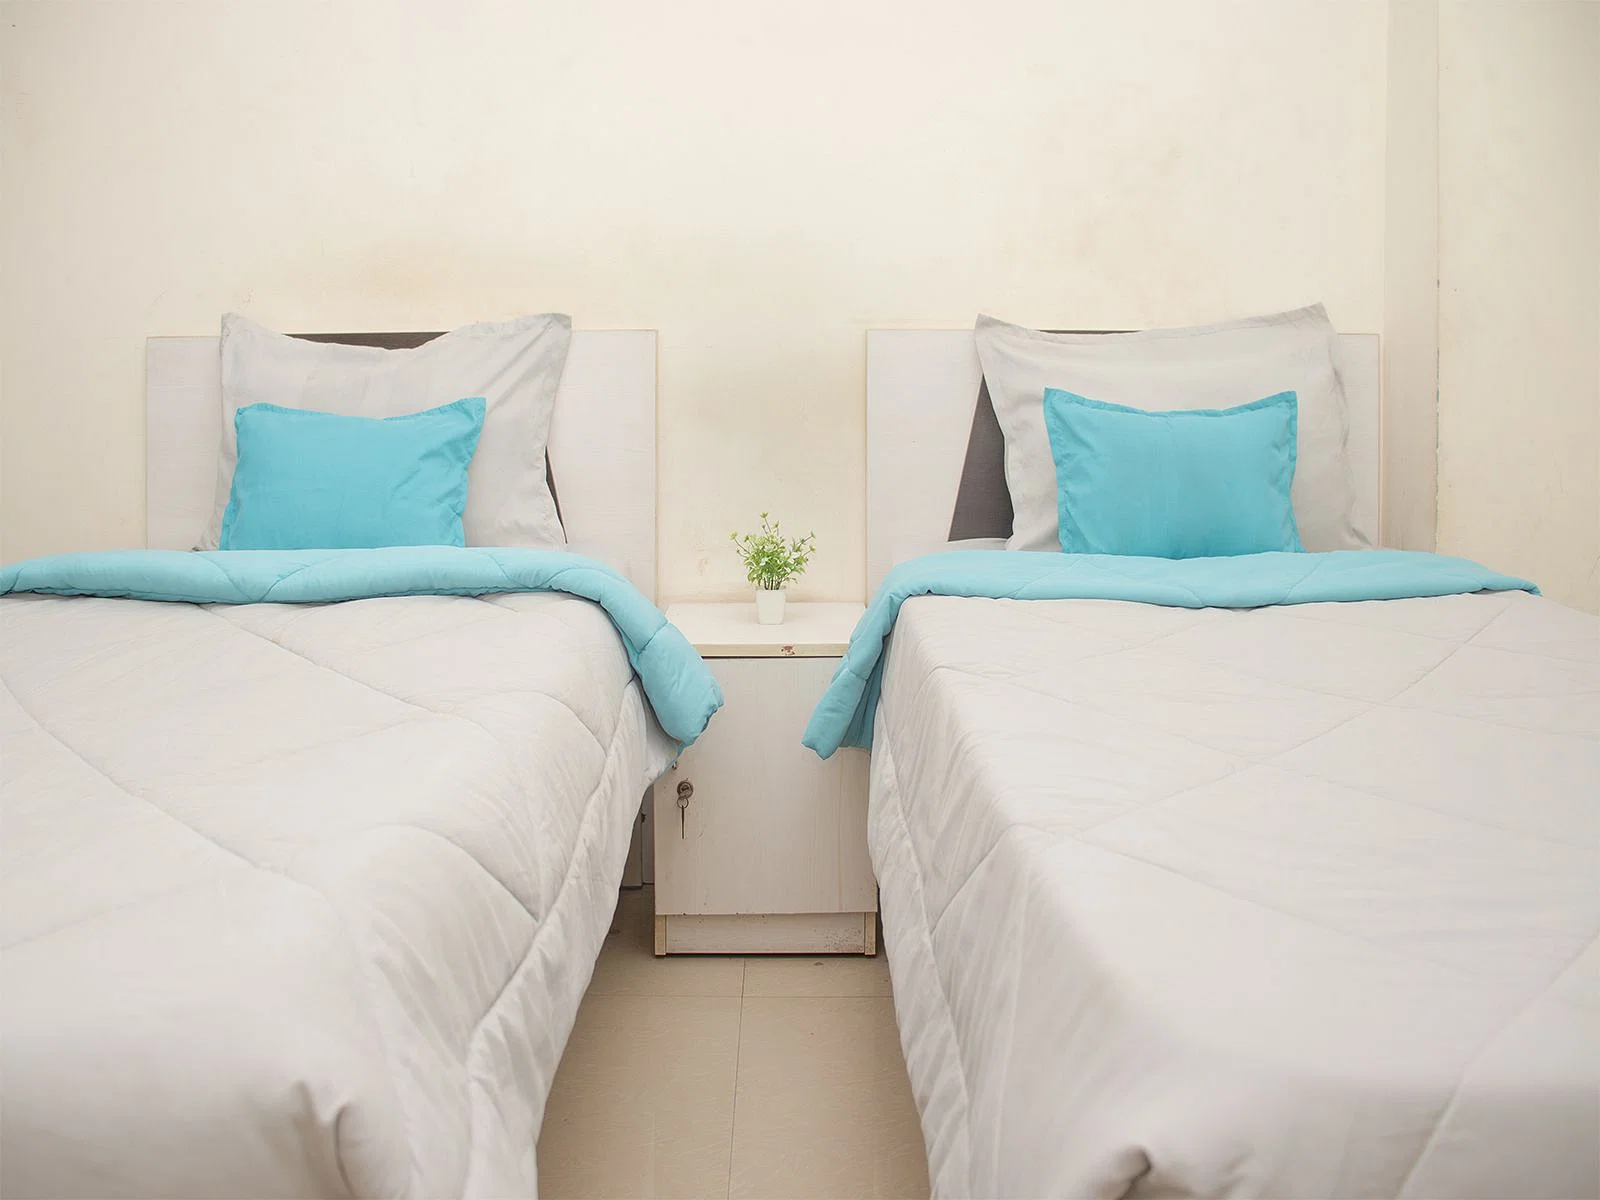 pgs in Sector 27 with Daily housekeeping facilities and free Wi-Fi-Zolo Bright